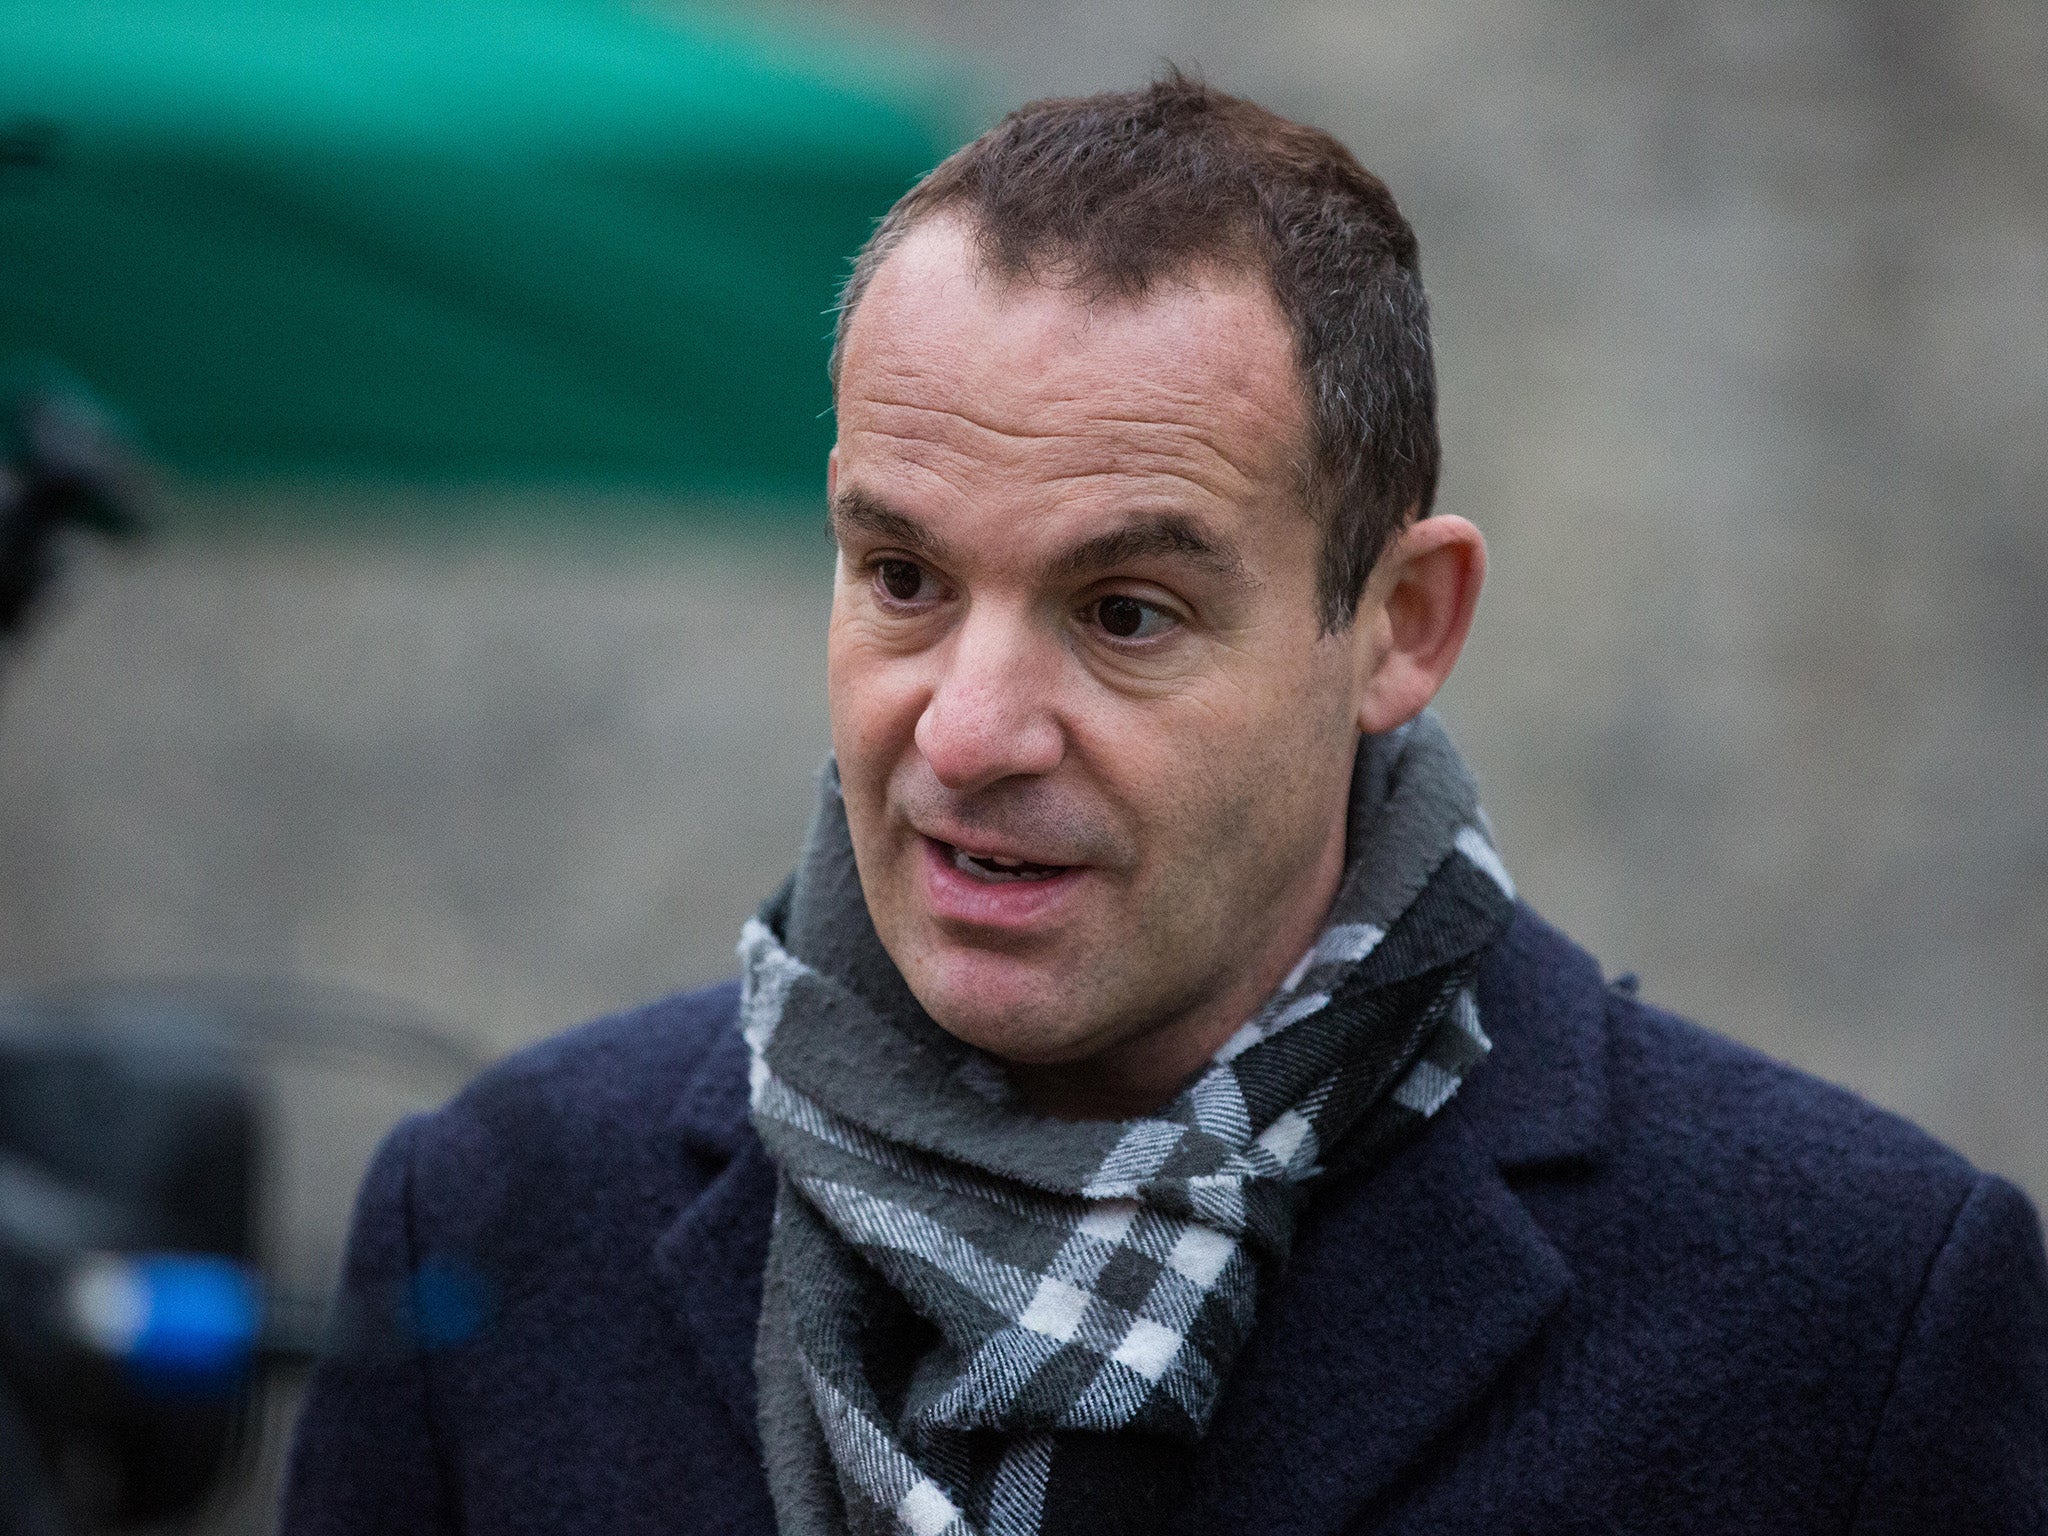 Martin Lewis is suing Facebook for defamation after it published dozens of fake adverts featuring his face and name